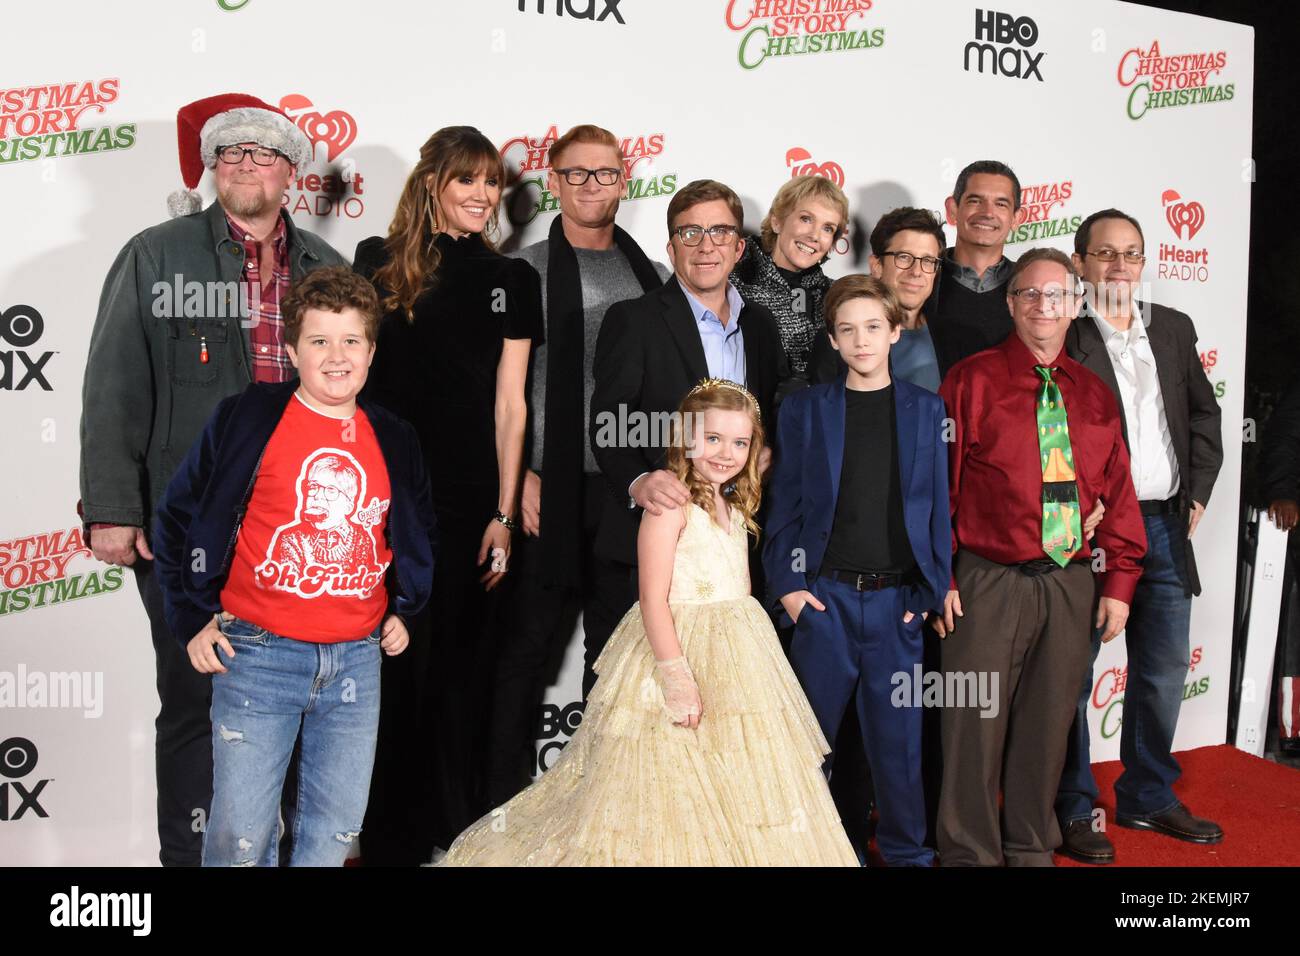 Los Angeles, California, USA 12th November 2022 (L-R) Executive Producer Nick Schenk, Actor Davis Murphy, Actress Erinn Hayes, Actor Zach Ward, Producer/Writer/Actor Peter Billingsley, Actress Julianna Layne, Actress Julie Hagerty, Actor River Drosche, Actor RD Robb, Director Clay Kaytis, Actor Scott Schwartz and Actor Ian Petrella attend 'A Christmas Story Christmas' Premiere at Gene Autry Museum on November 12, 2022 in Los Angeles, California, USA. Photo by Barry King/Alamy Live News Stock Photo